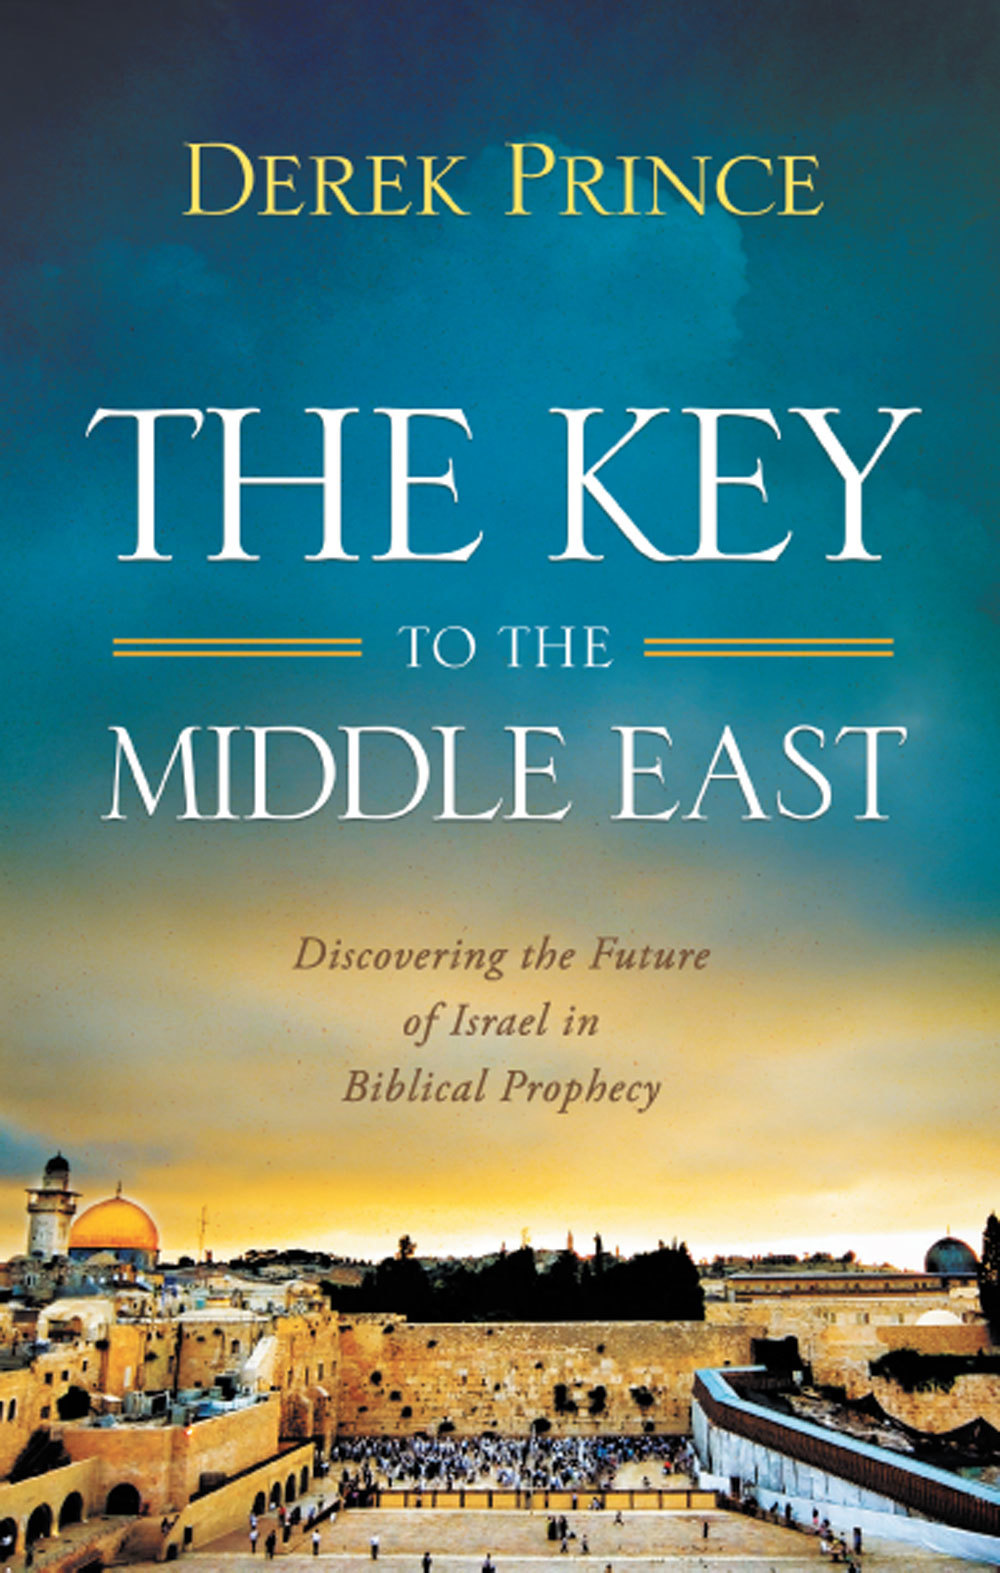 The key to the Middle East